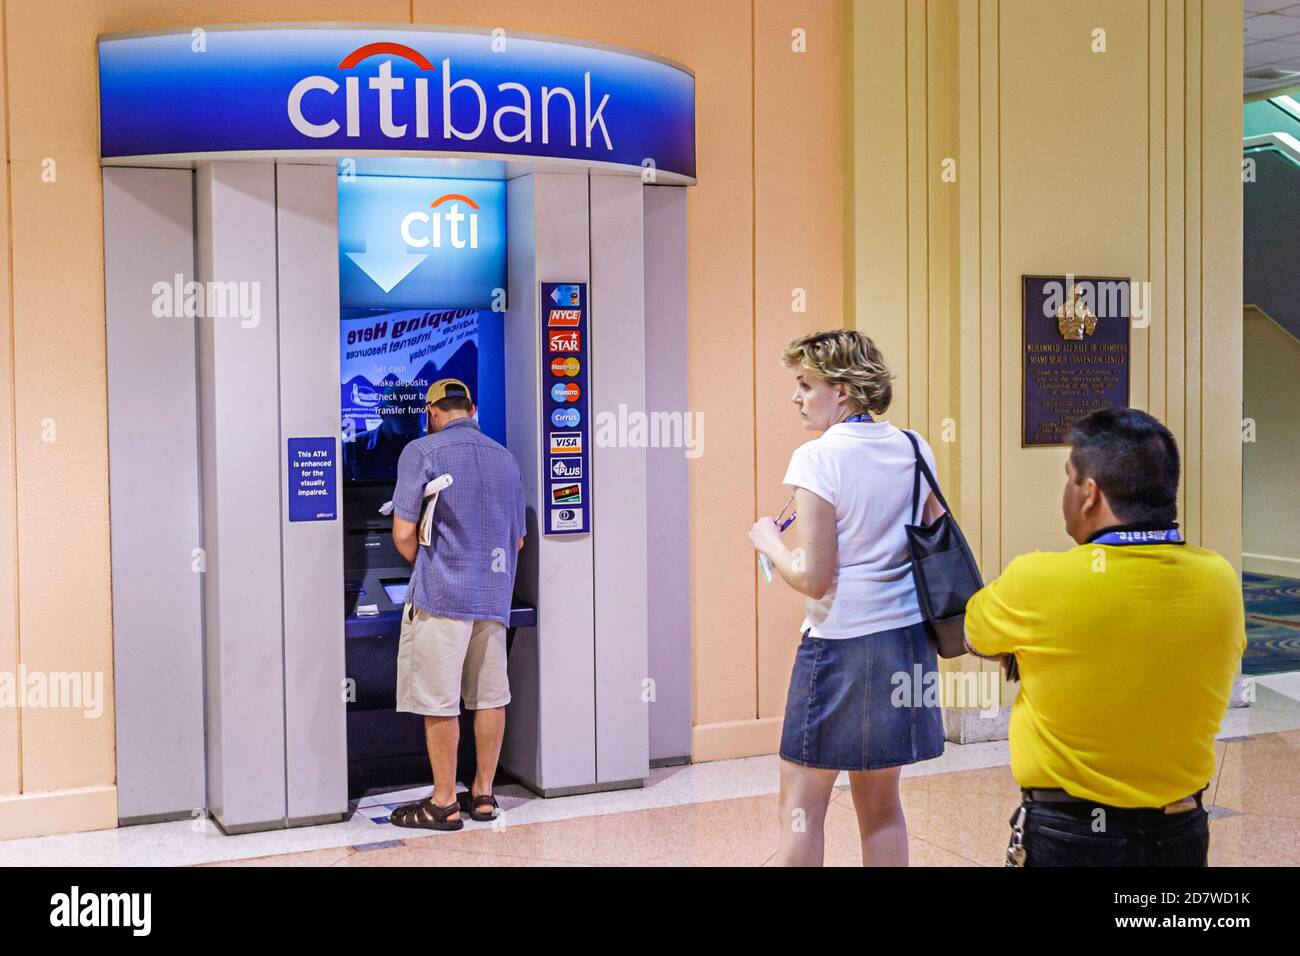 Miami Beach Florida,Convention Center,customers line queue Citibank ATM,bank banking making withdraw withdrawing money men male female women man woman Stock Photo